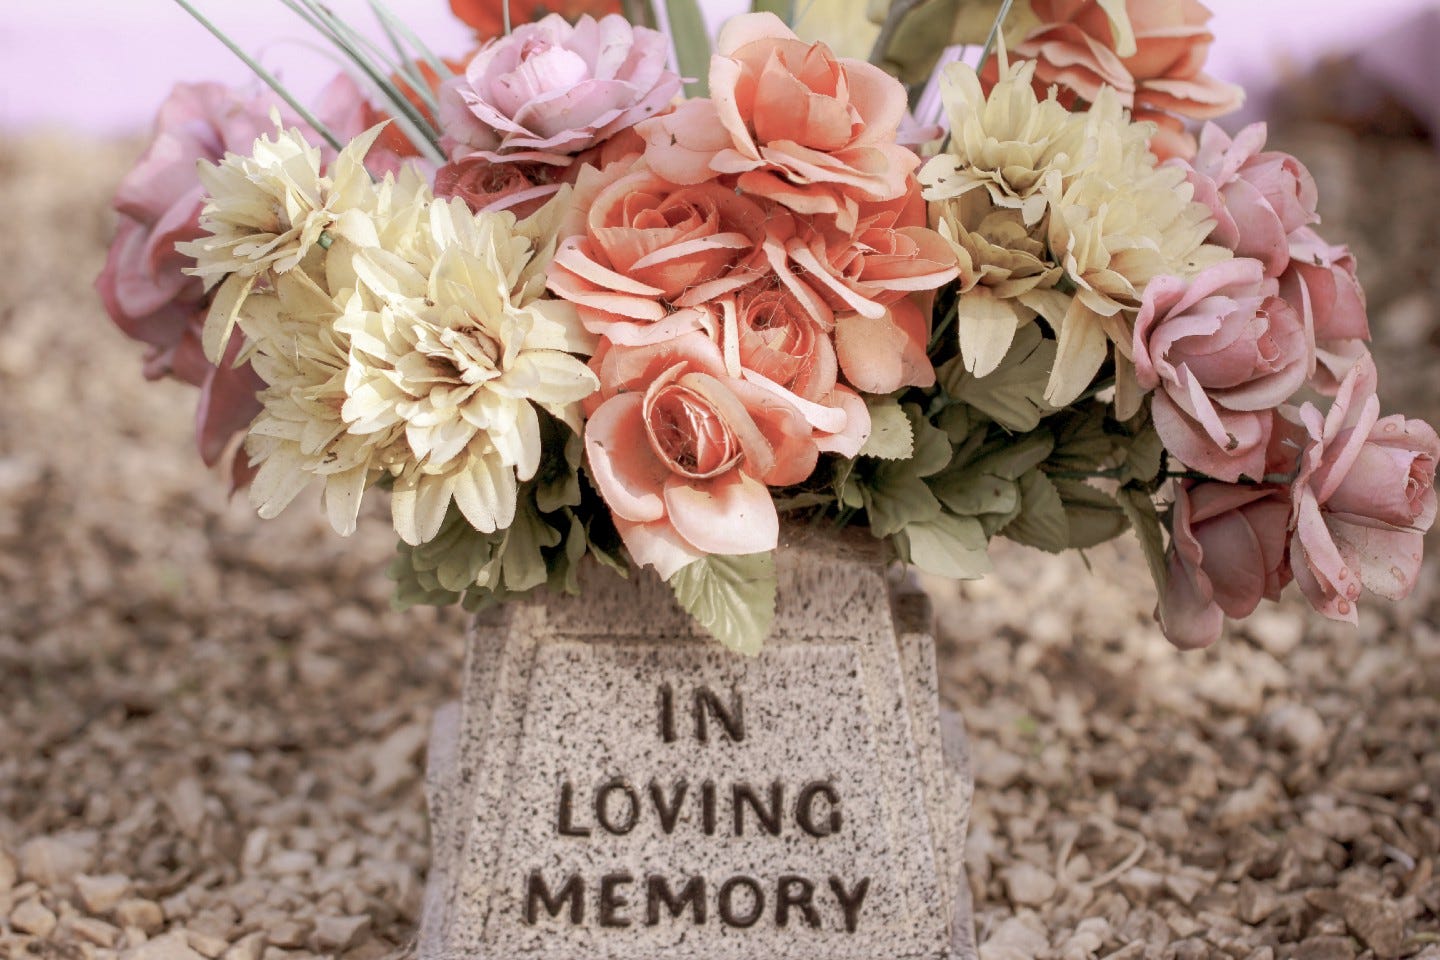 flowers on a headstone engraved with "In loving memory"